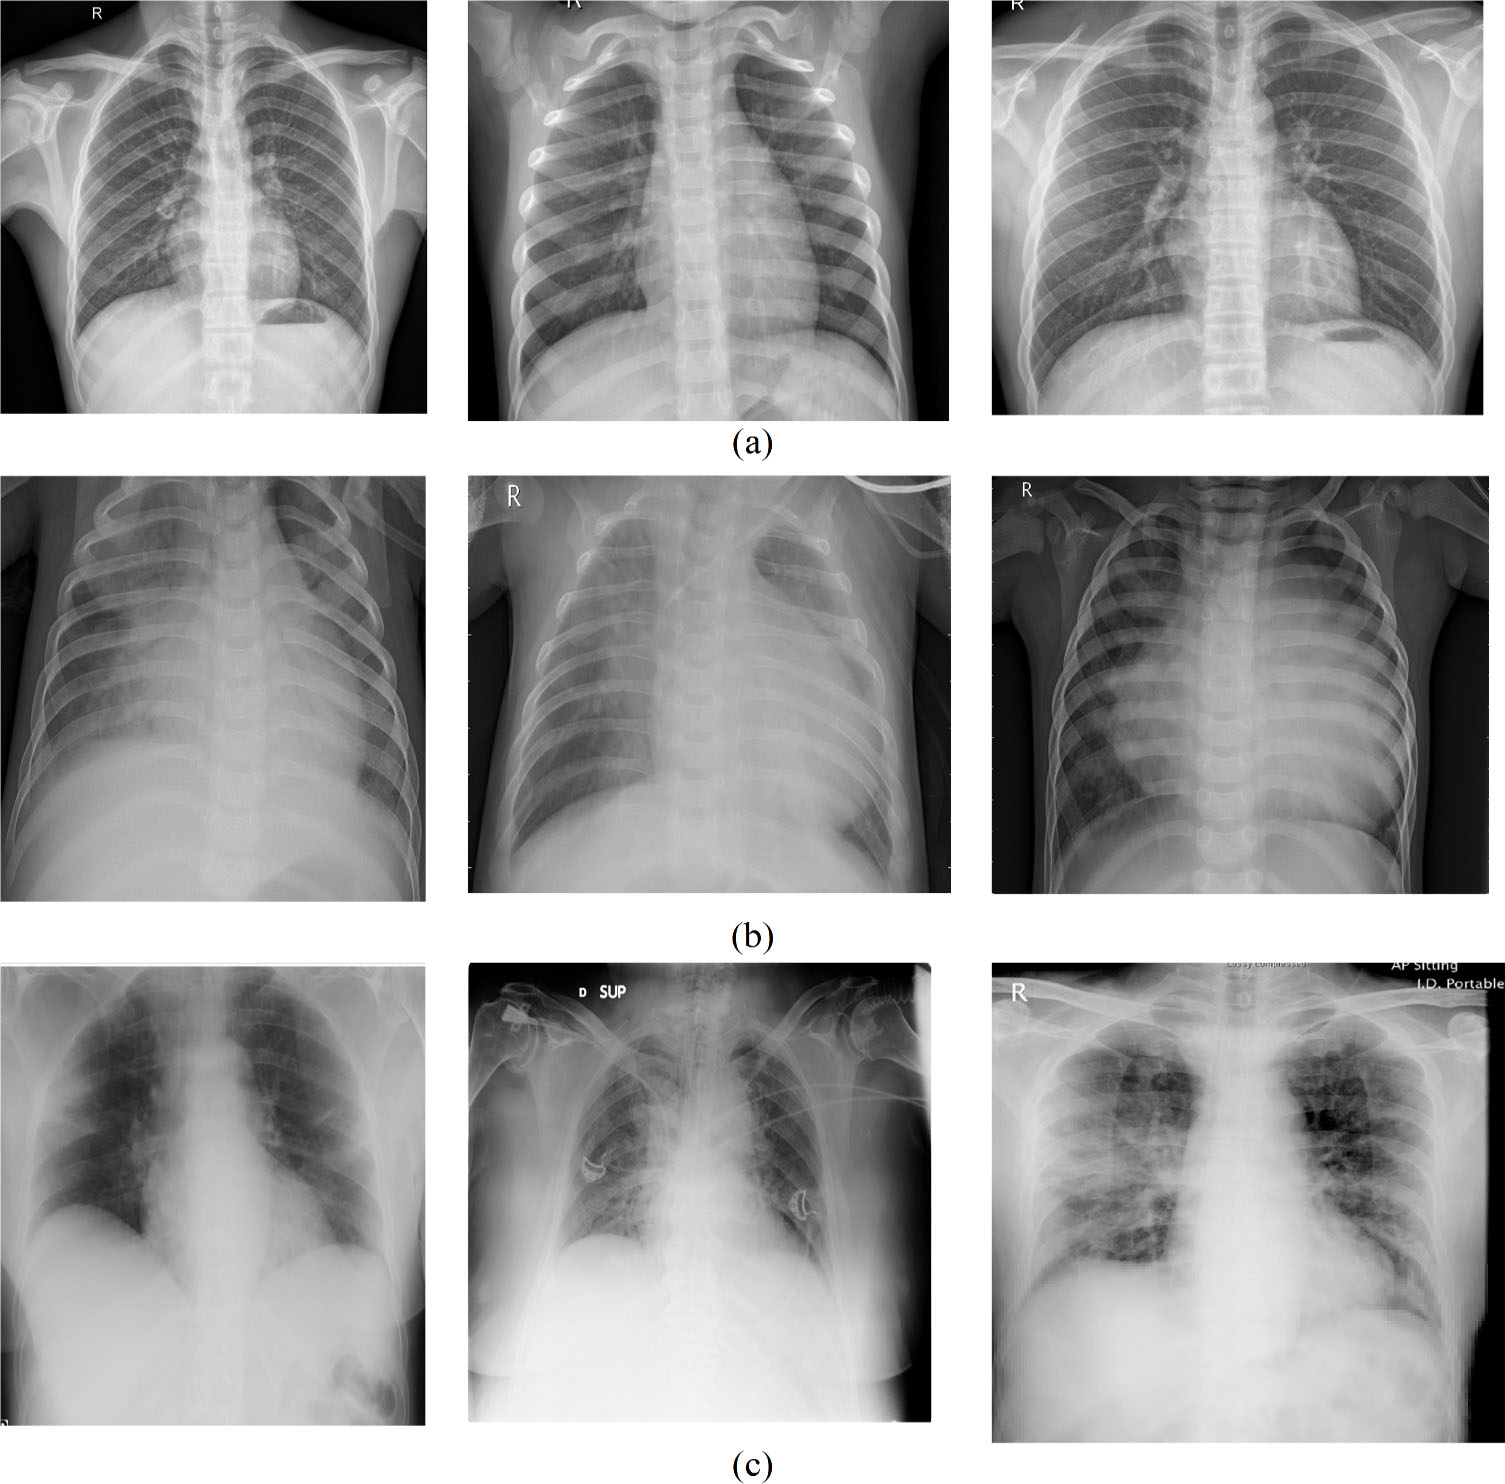 Example of the (a) normal, (b) pneumonia, and (c) COVID-19 experimental X-ray images [65].